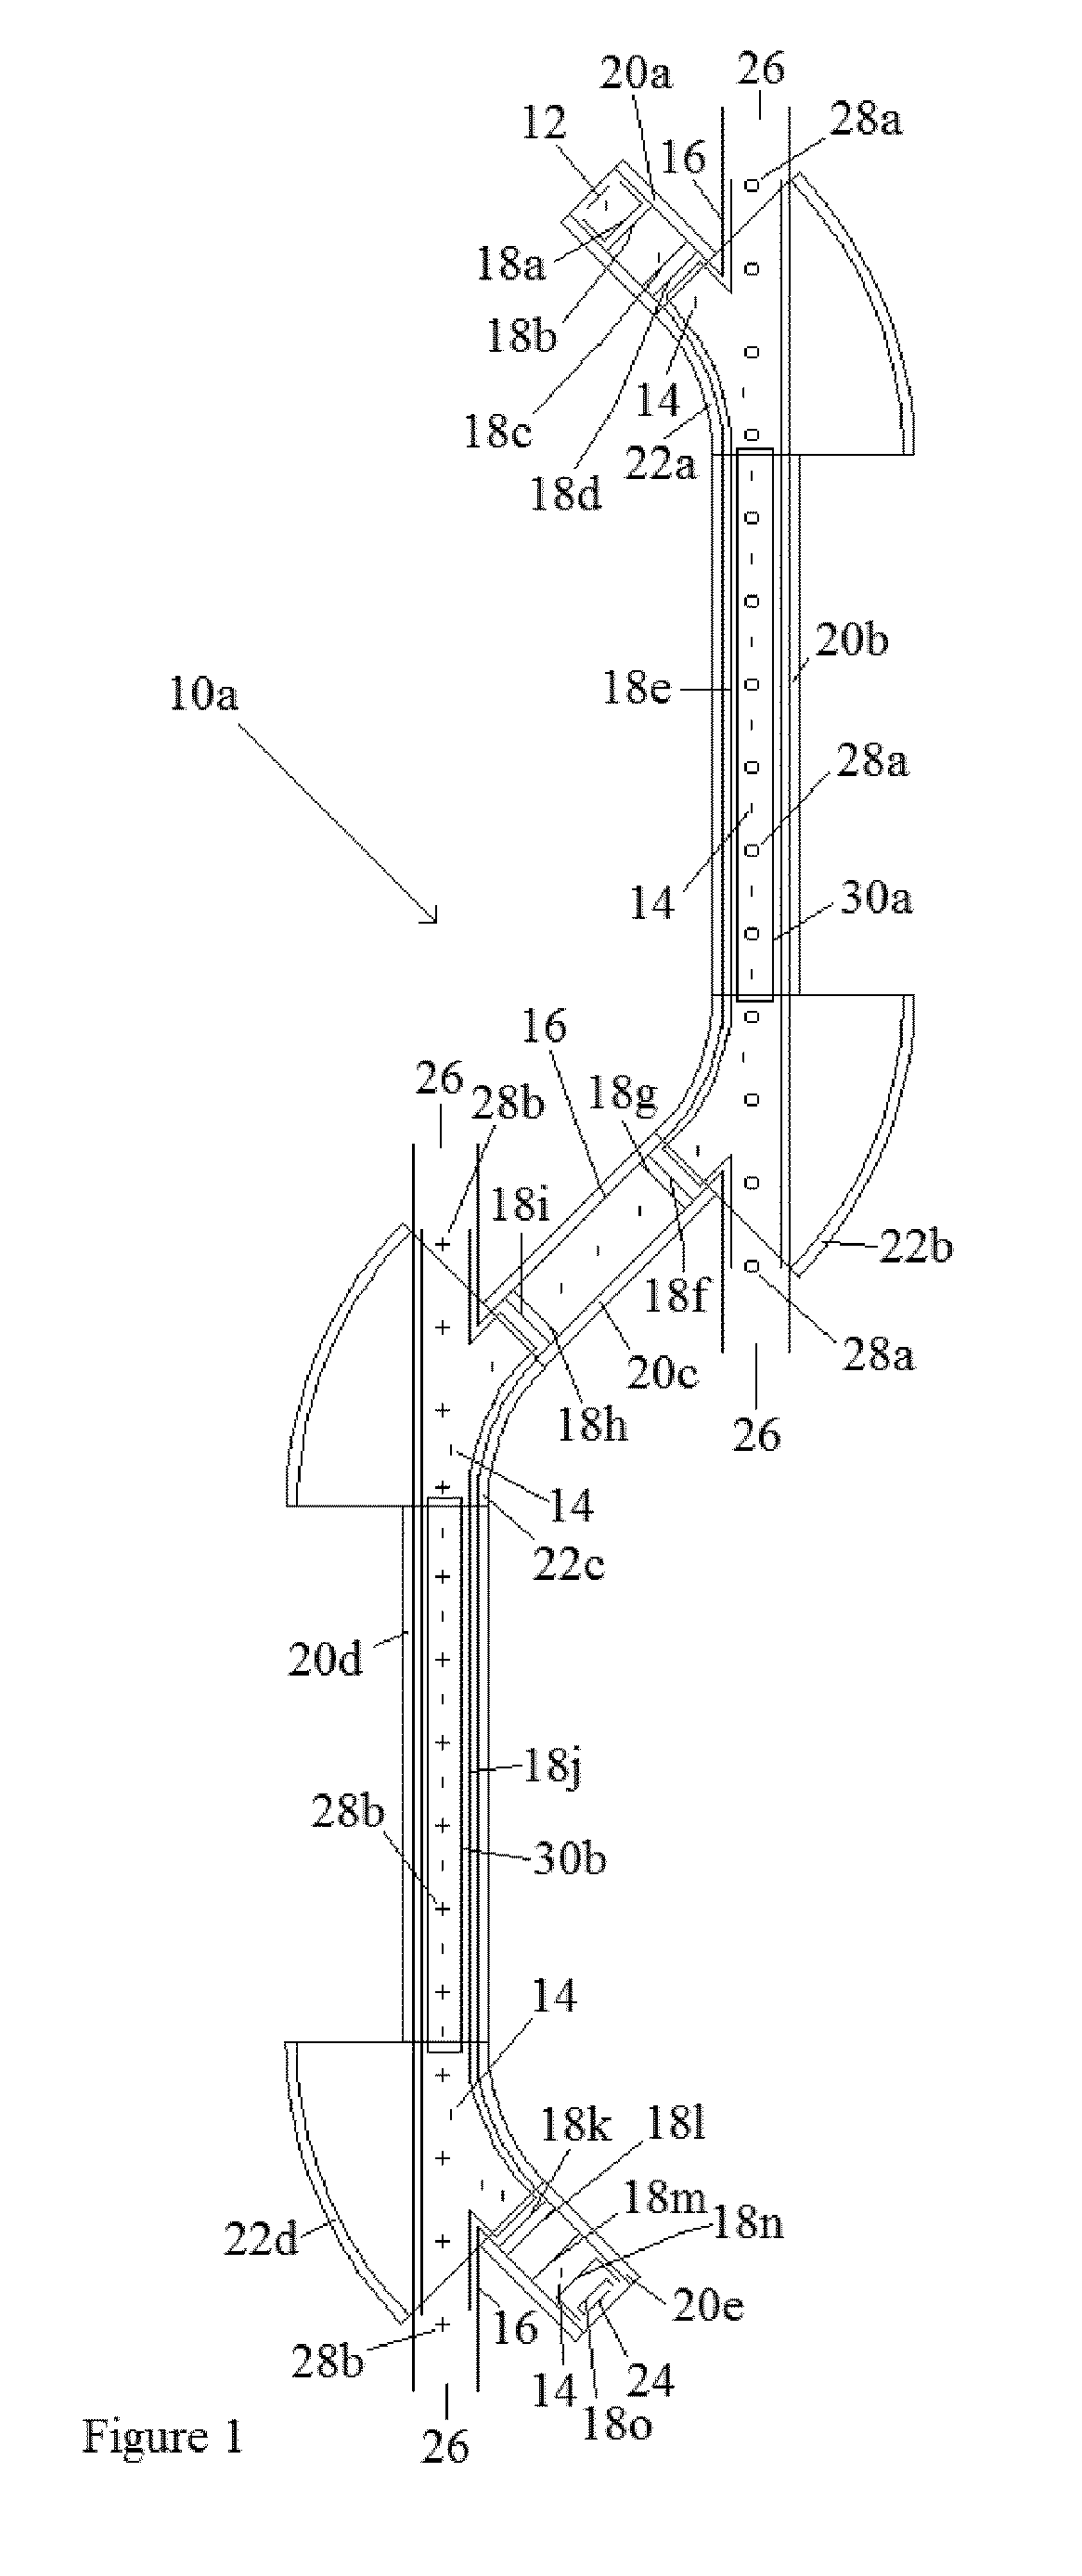 Electron cooling system and method for increasing the phase space intensity and overall intensity of ion beams in multiple overlap regions